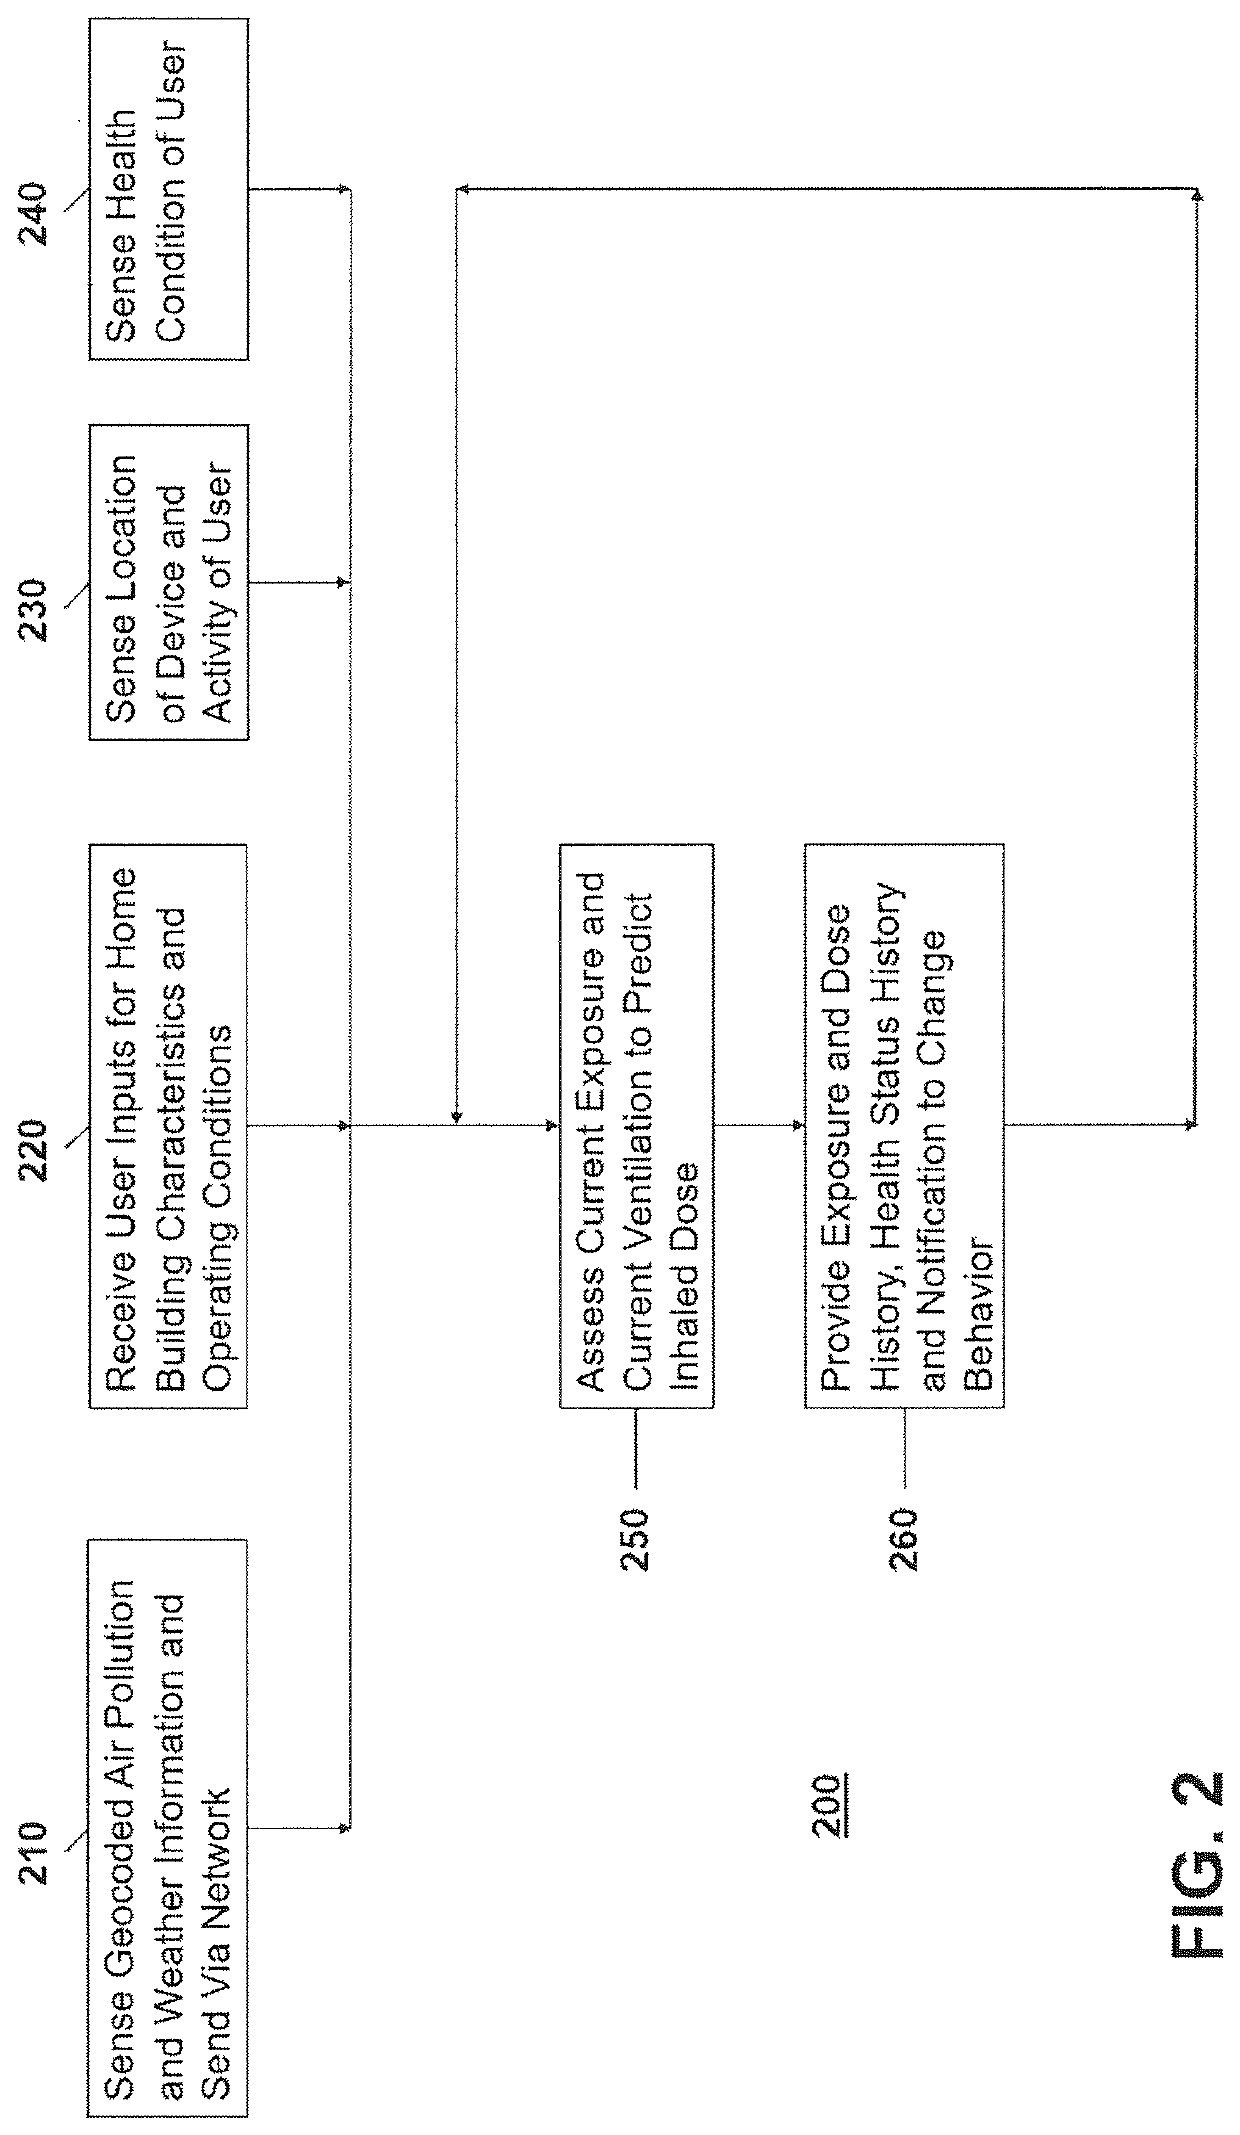 System and method for assessment and management of air pollution exposures using personal devices